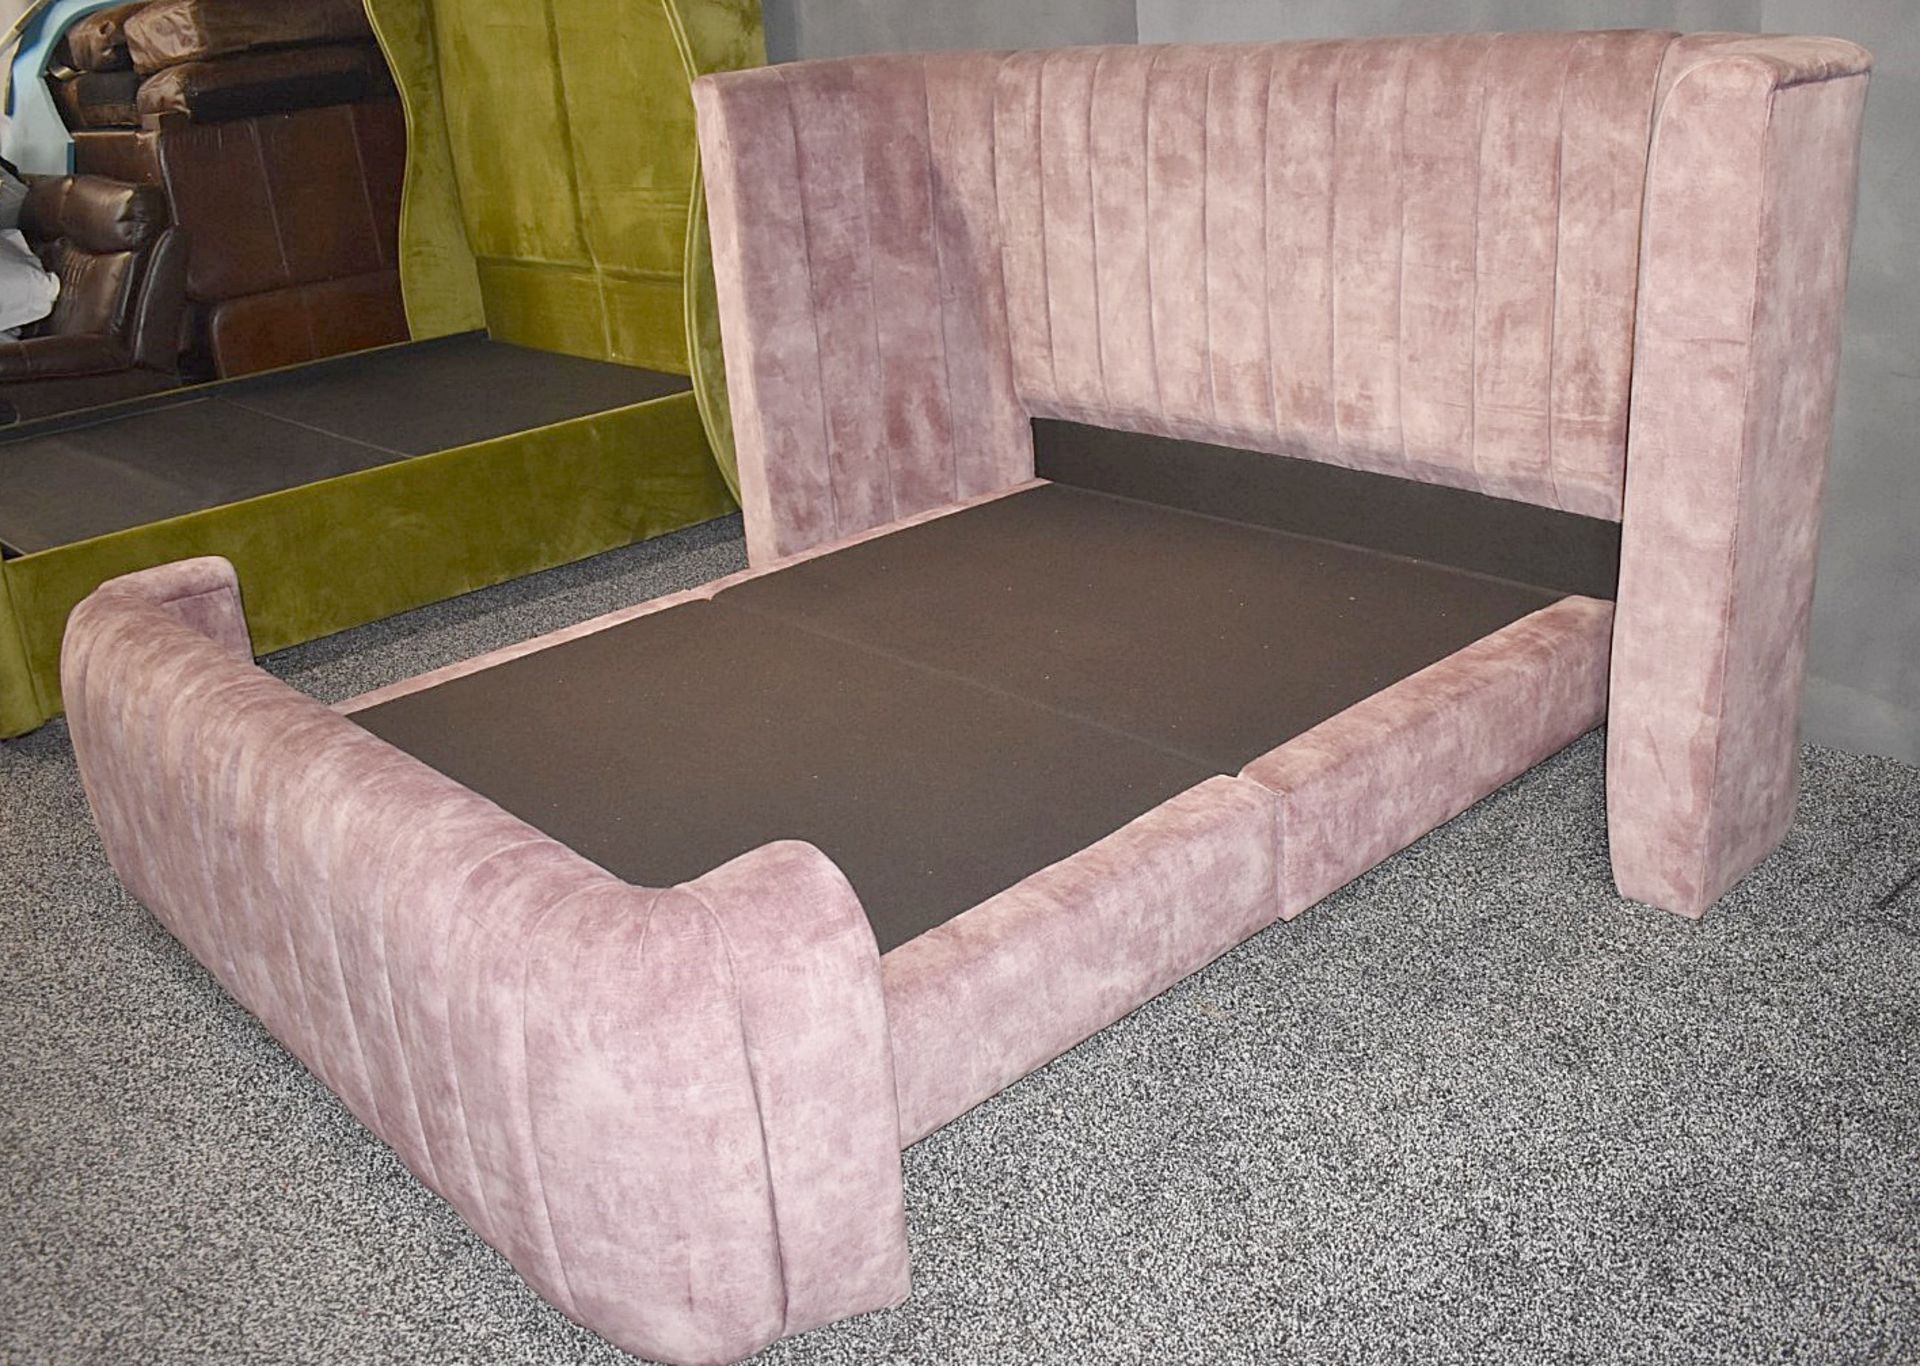 1 x Kingsize Bedframe, Richly Upholstered in a Premium Pink Chenille - Luxury Furniture Showroom - Image 3 of 5